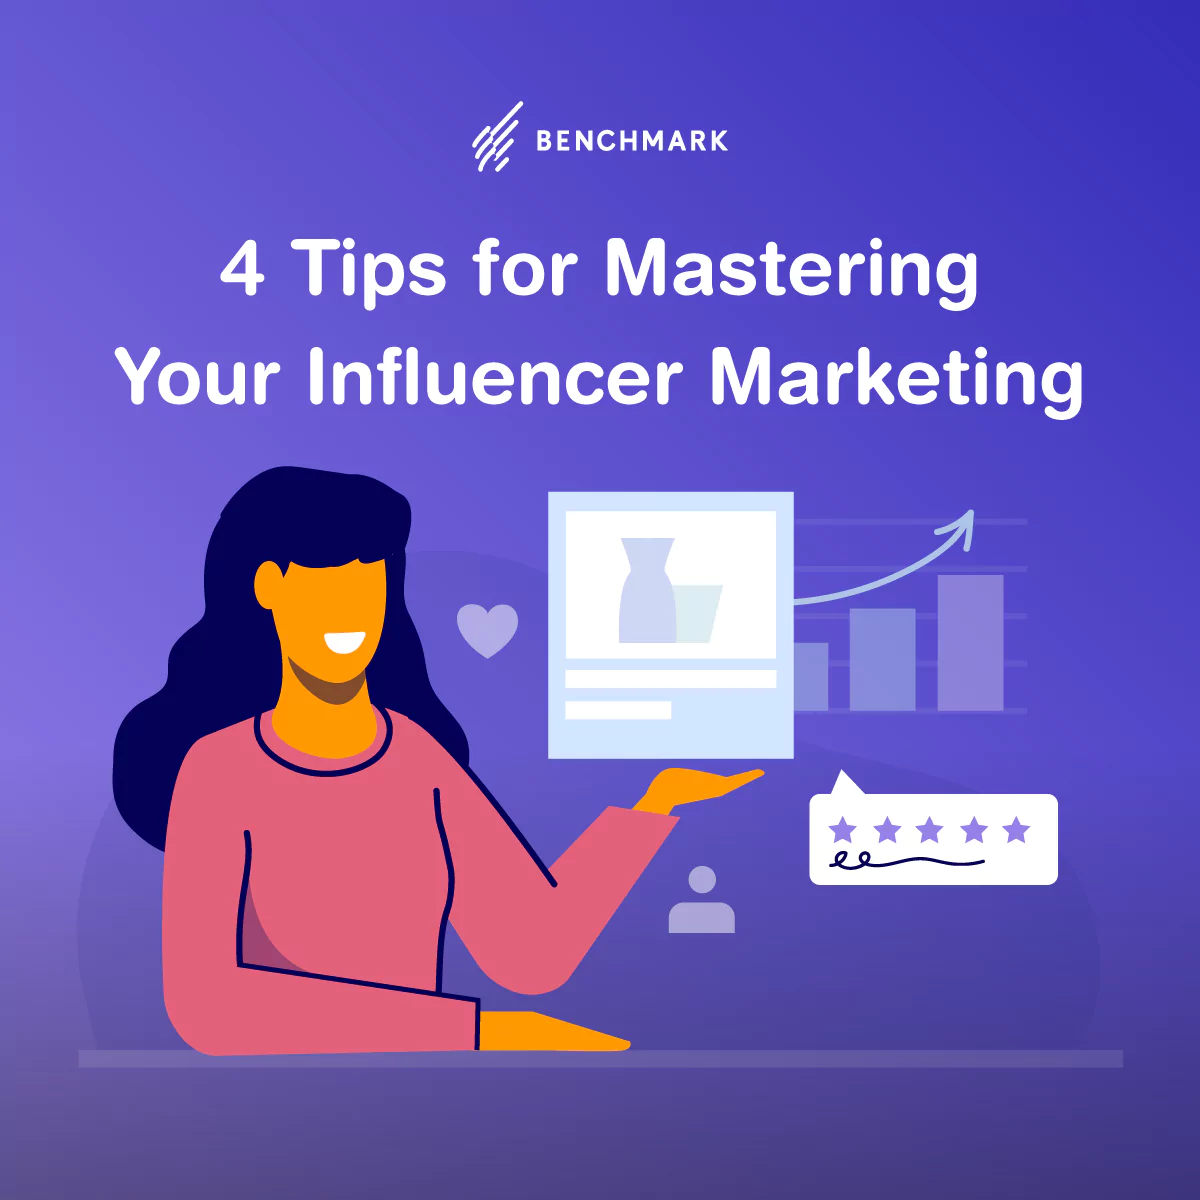 https://www.benchmarkemail.com/wp-content/uploads/2021/03/4-tips-for-mastering-your-influencer-marketing-social.webp